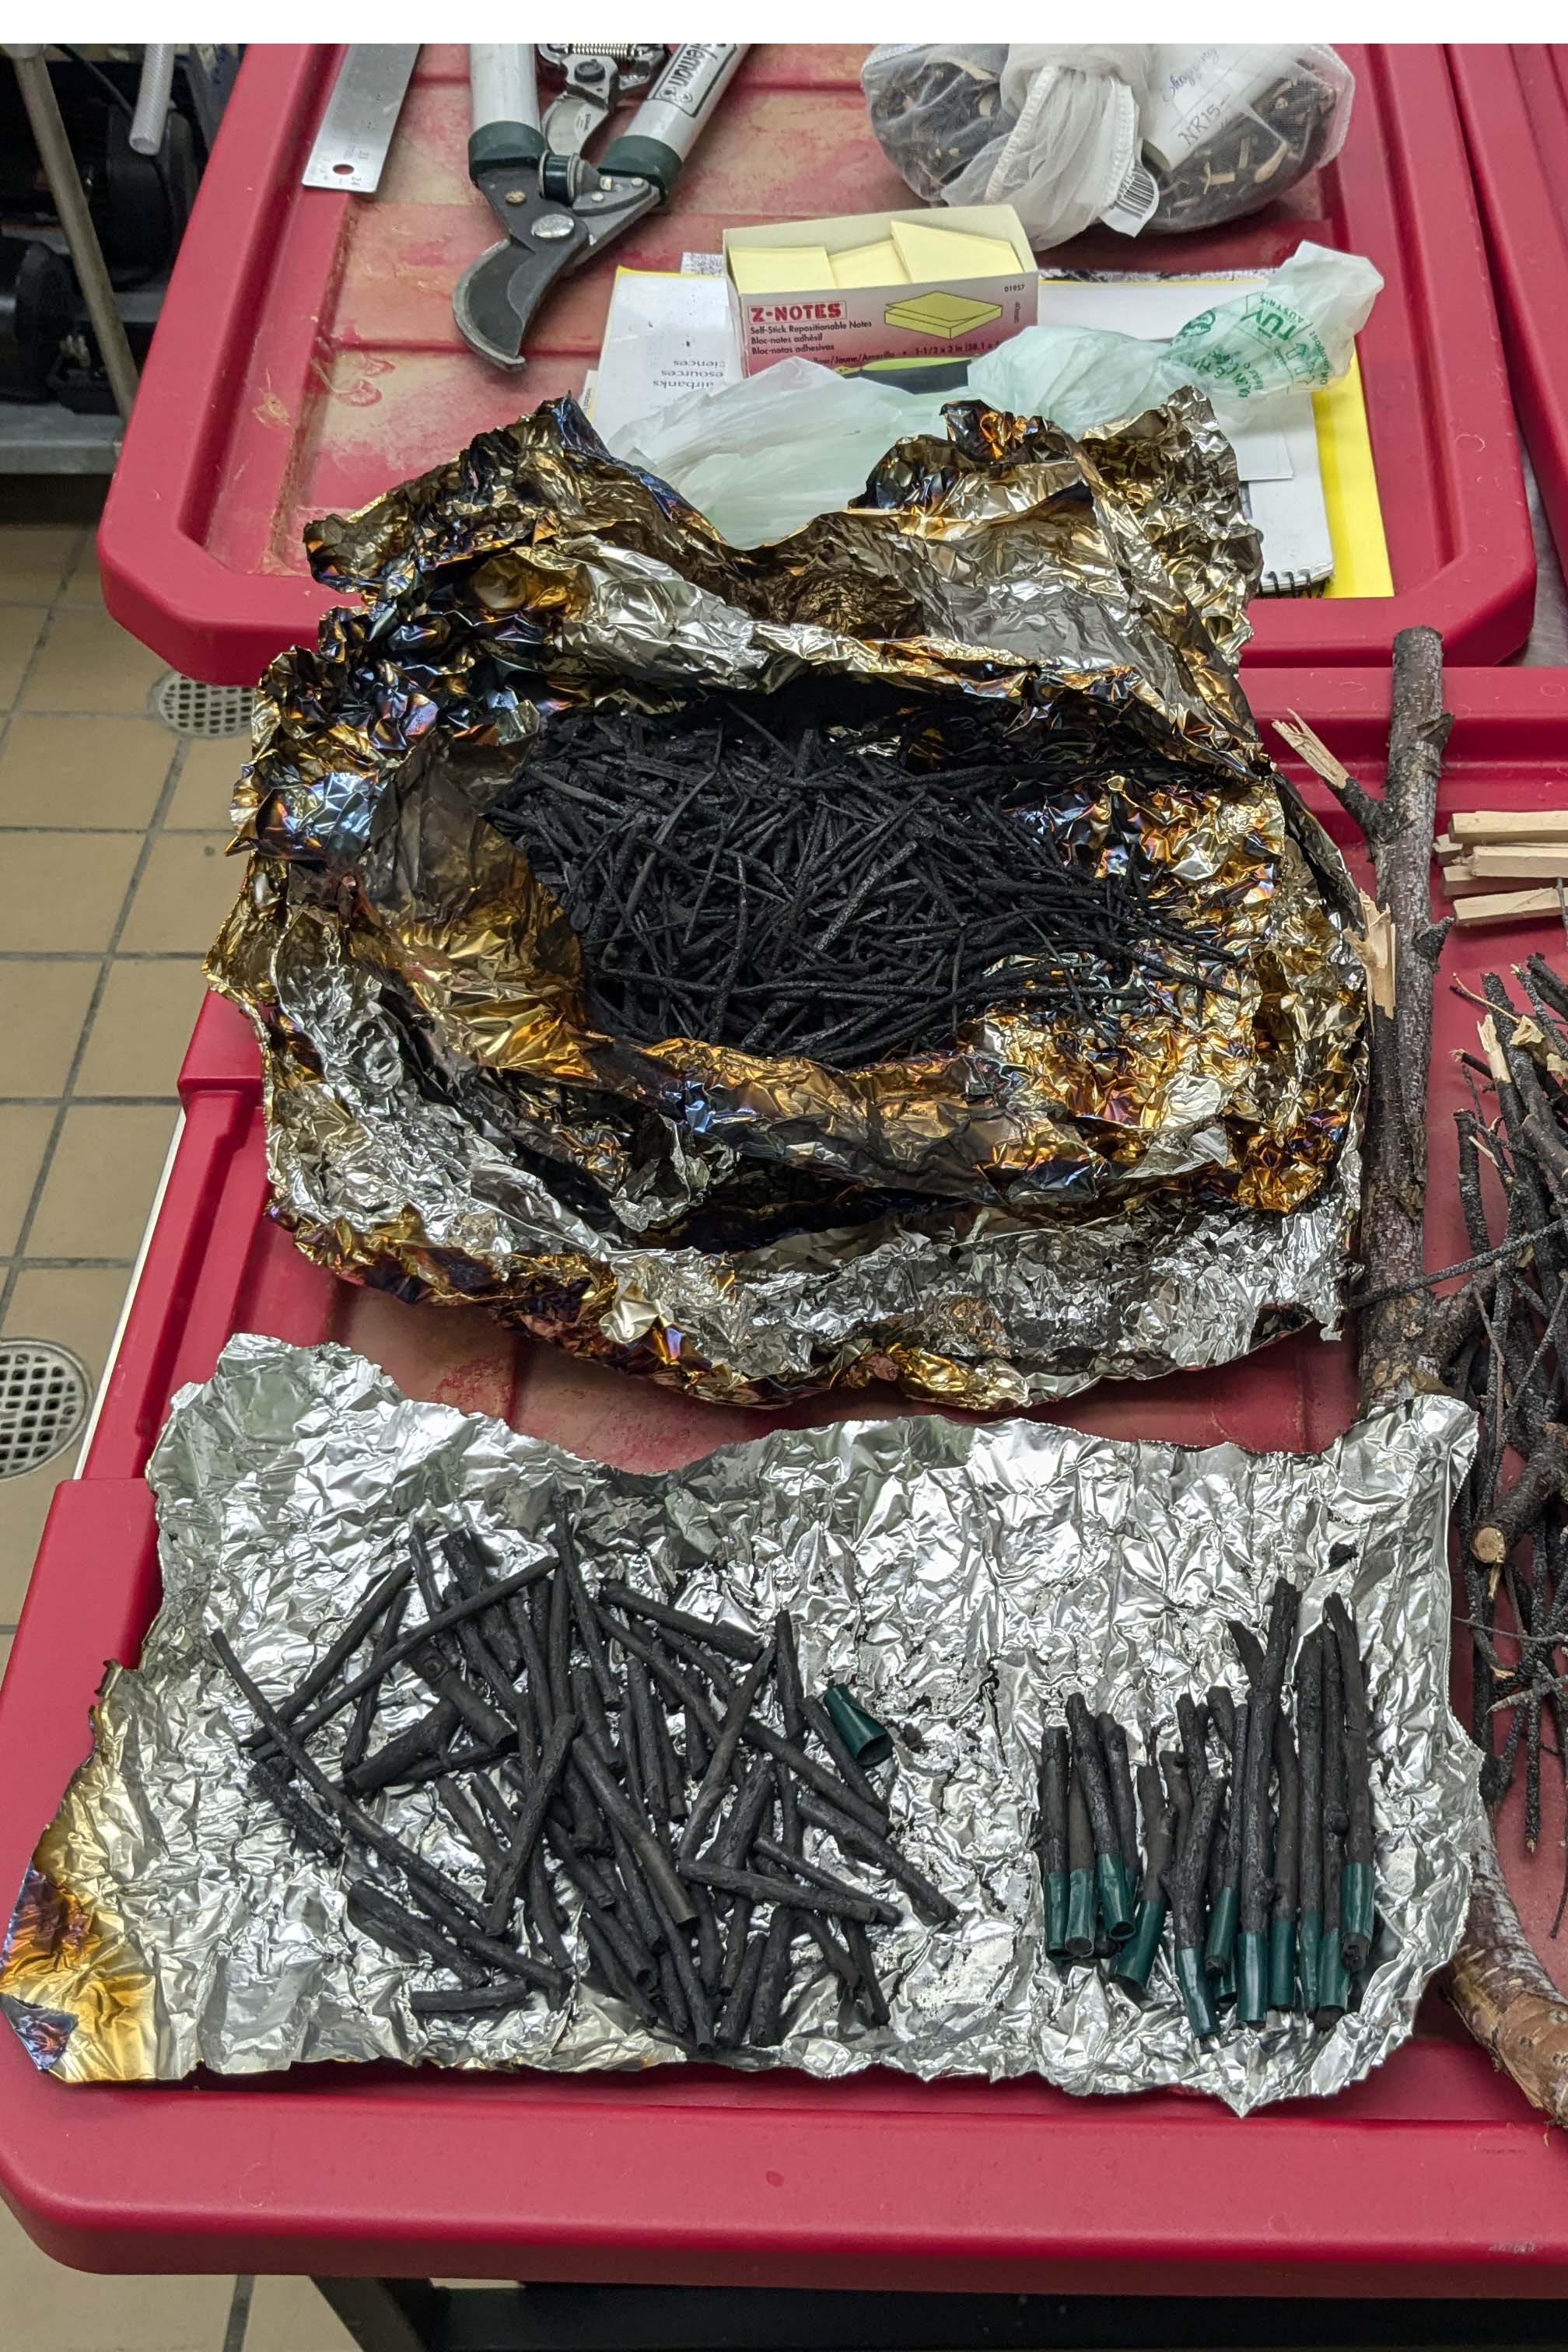 Charcoal sticks for drawing made out of birch branches pile on top of tin foil